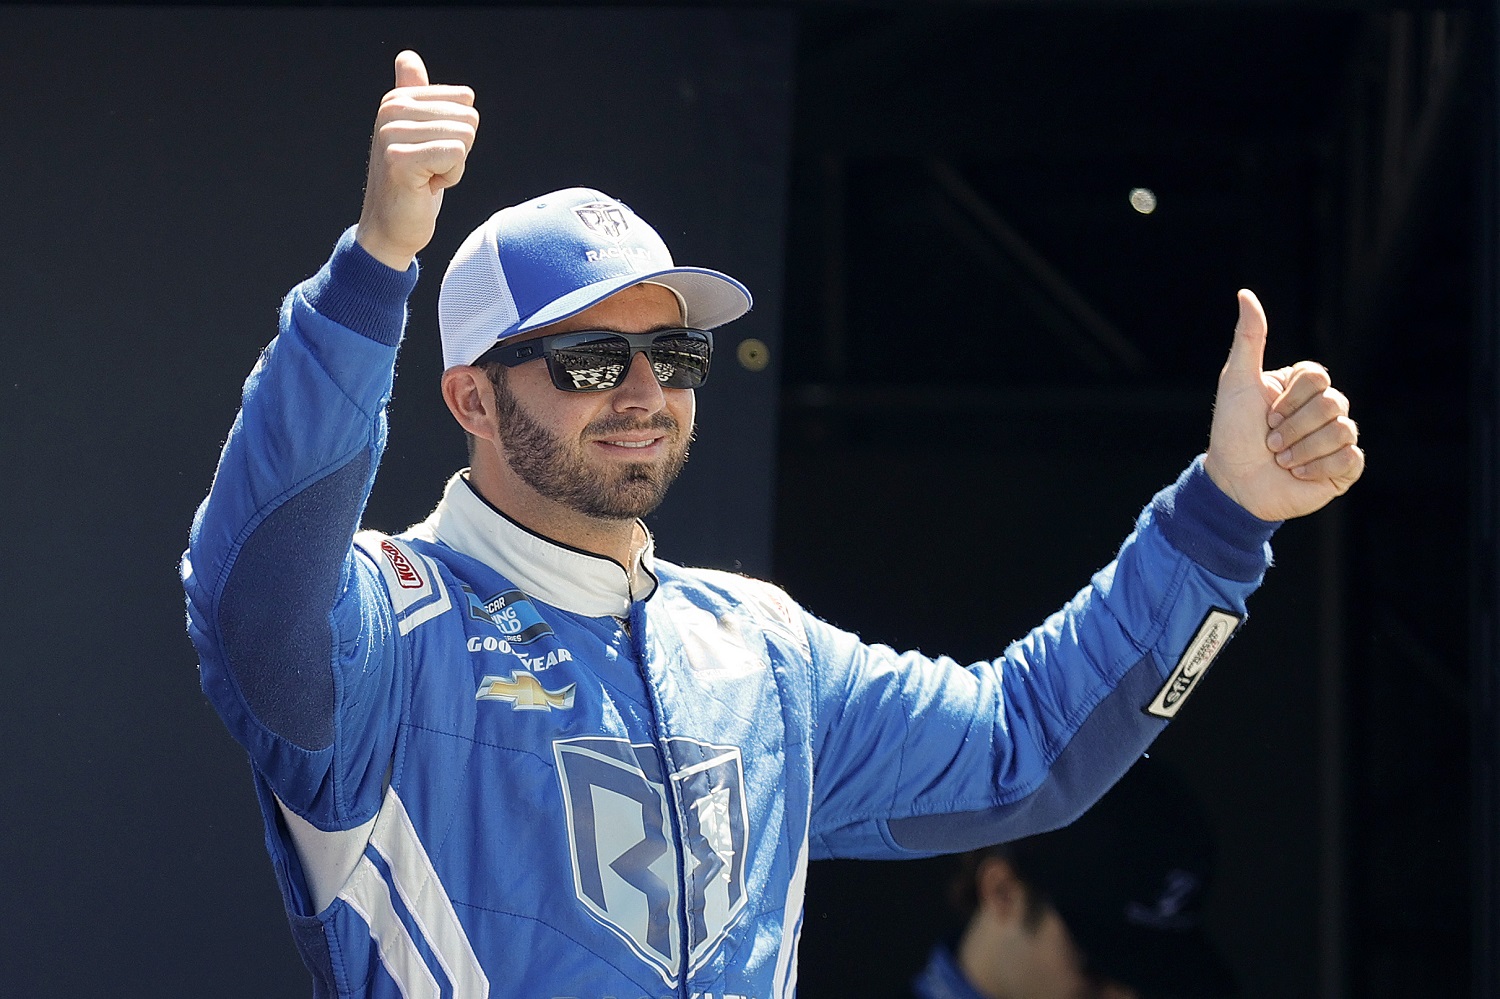 Driver Matt DiBenedetto gives a thumbs-up to fans onstage during introductions prior to the NASCAR Camping World Truck Series CRC Brakleen 150 at Pocono Raceway on July 23, 2022. | Tim Nwachukwu/Getty Images